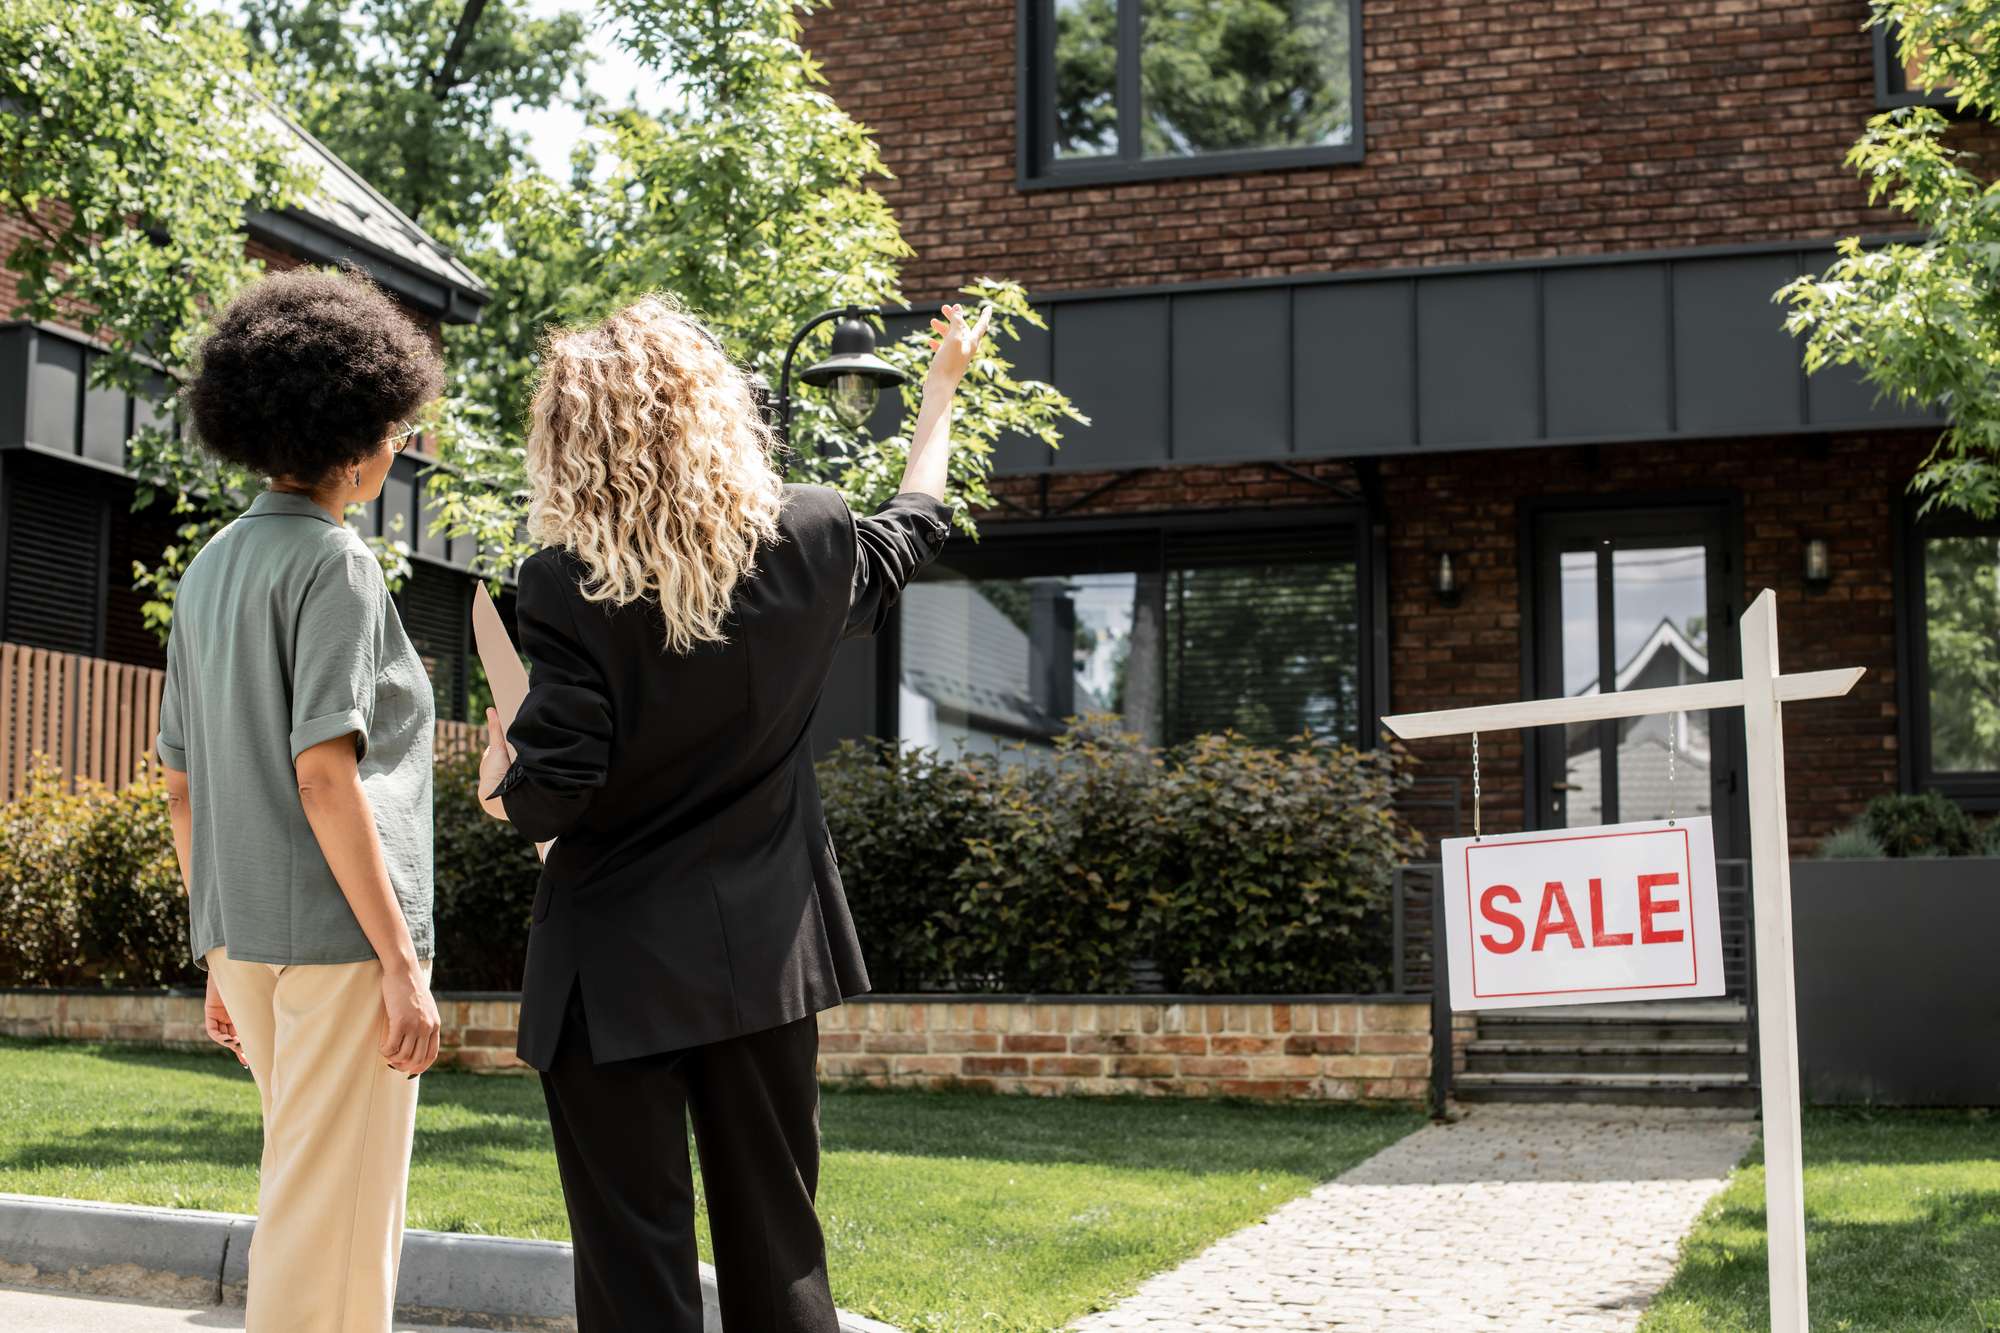 Two women standing in front of a house with a sale sign.